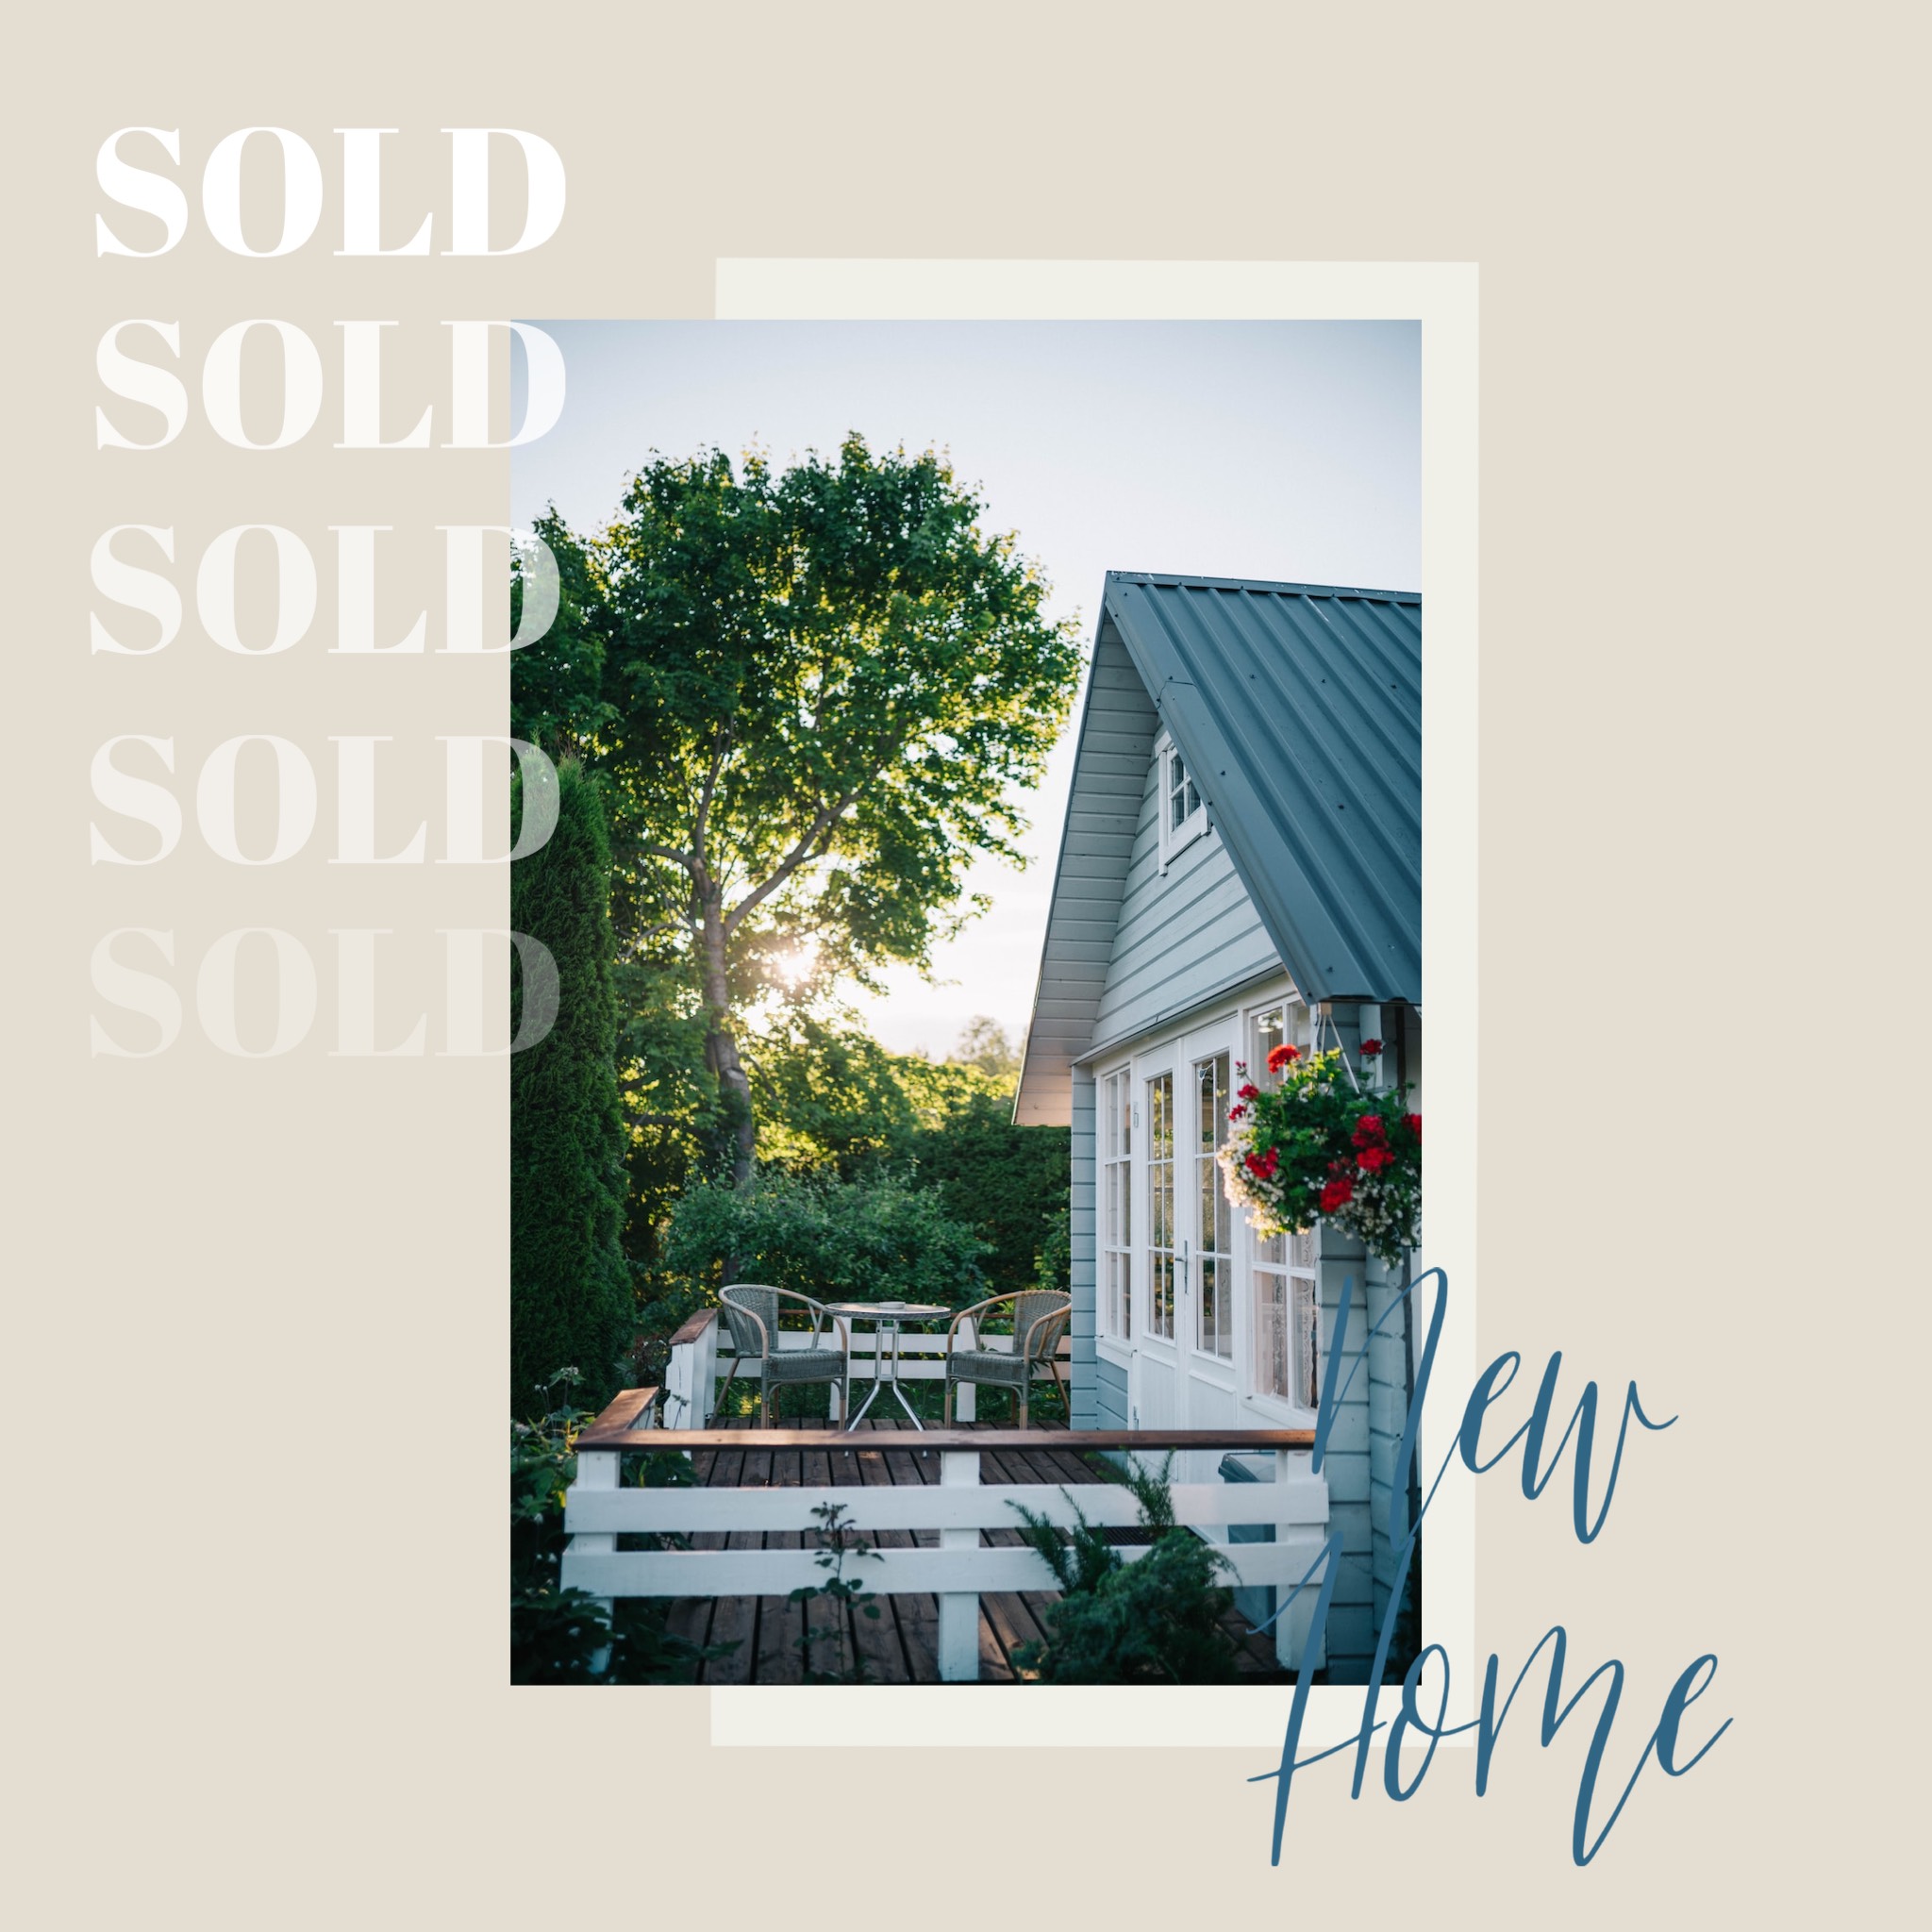 A Picture Of A House With The Words Sold Sold Sold Sold Sold Sold Sold Sold Real Estate Template